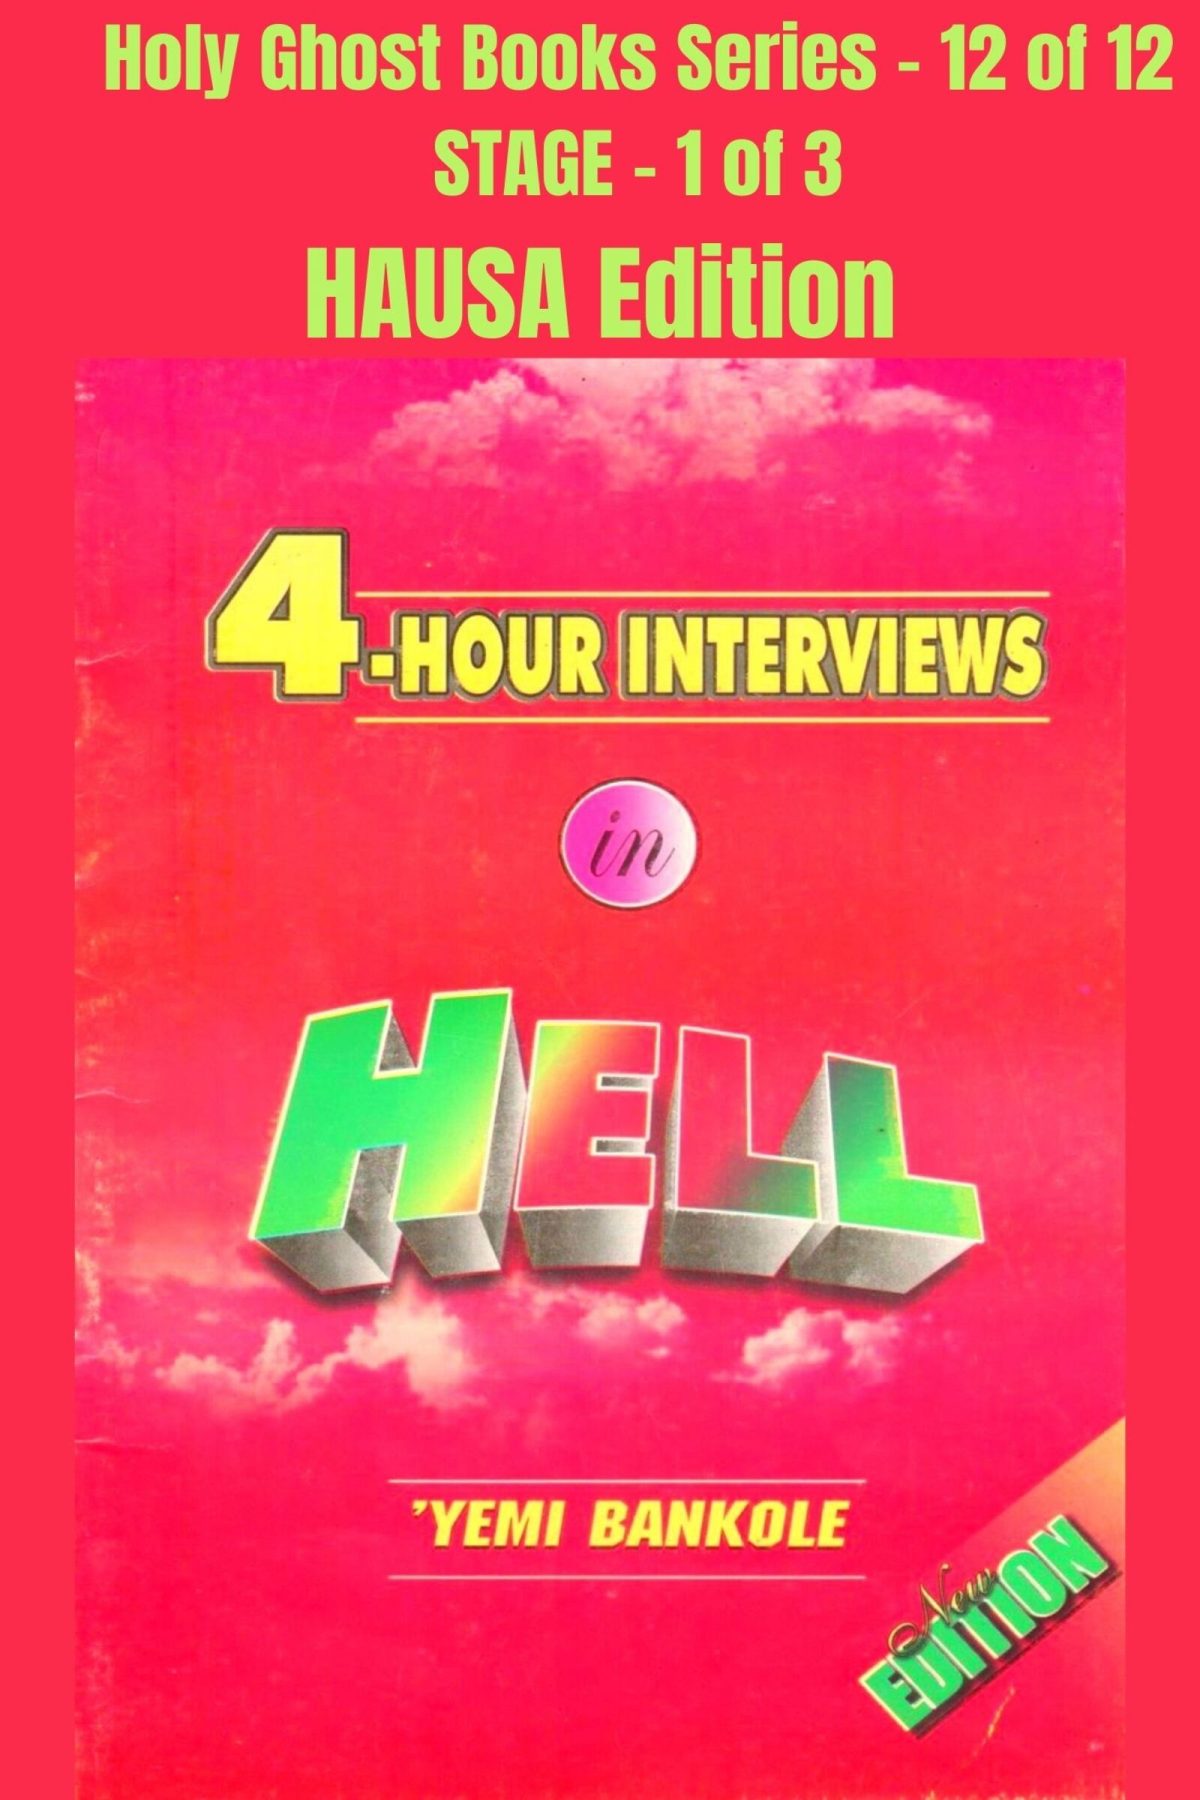 4 hour interview in hell HAUSA